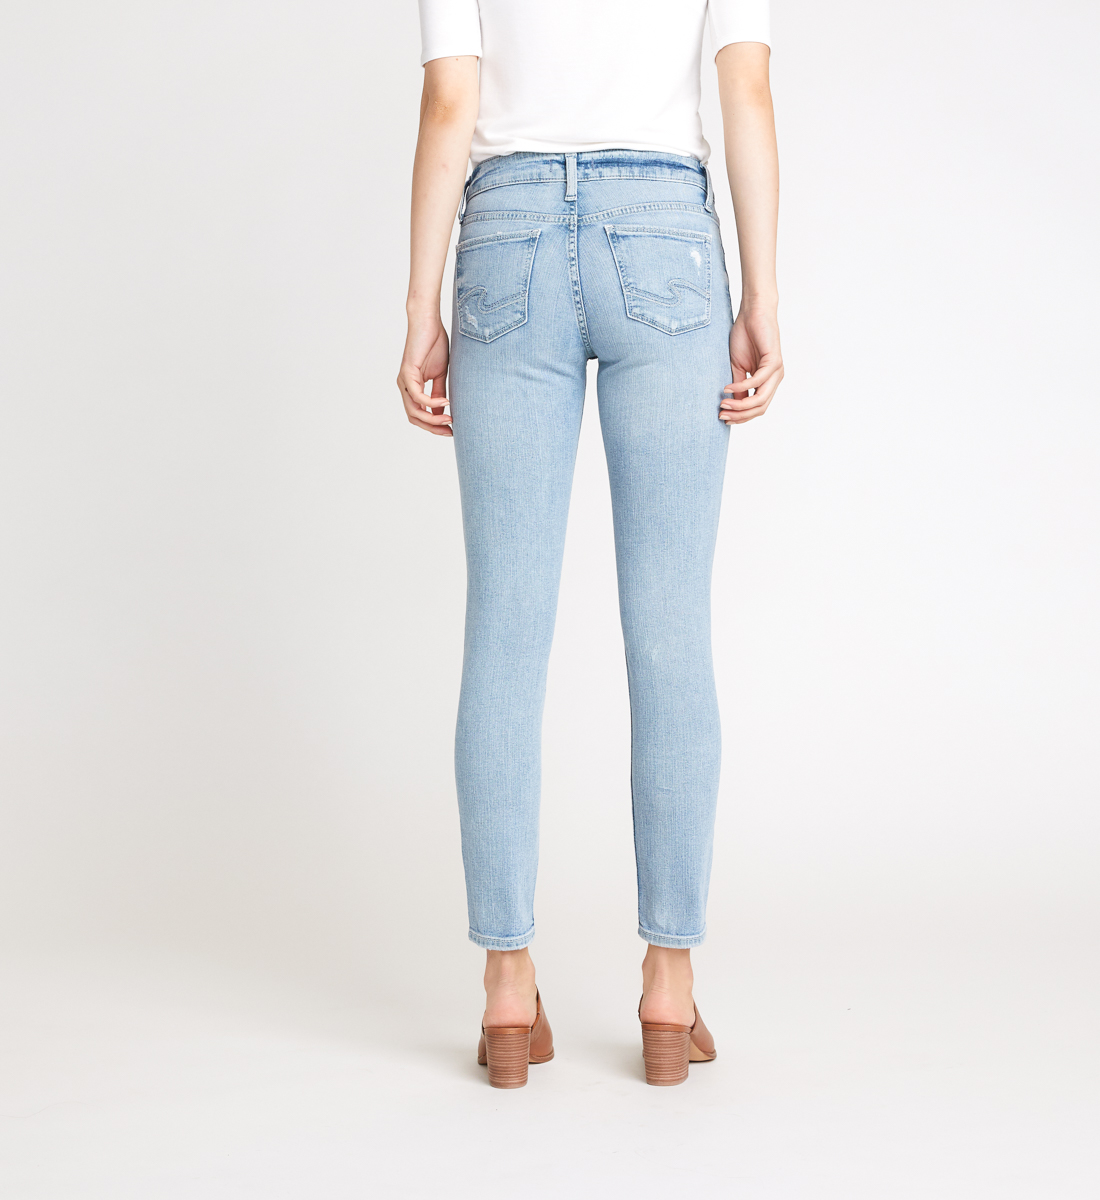 Suki Mid Rise Skinny Jeans - Silver Jeans US